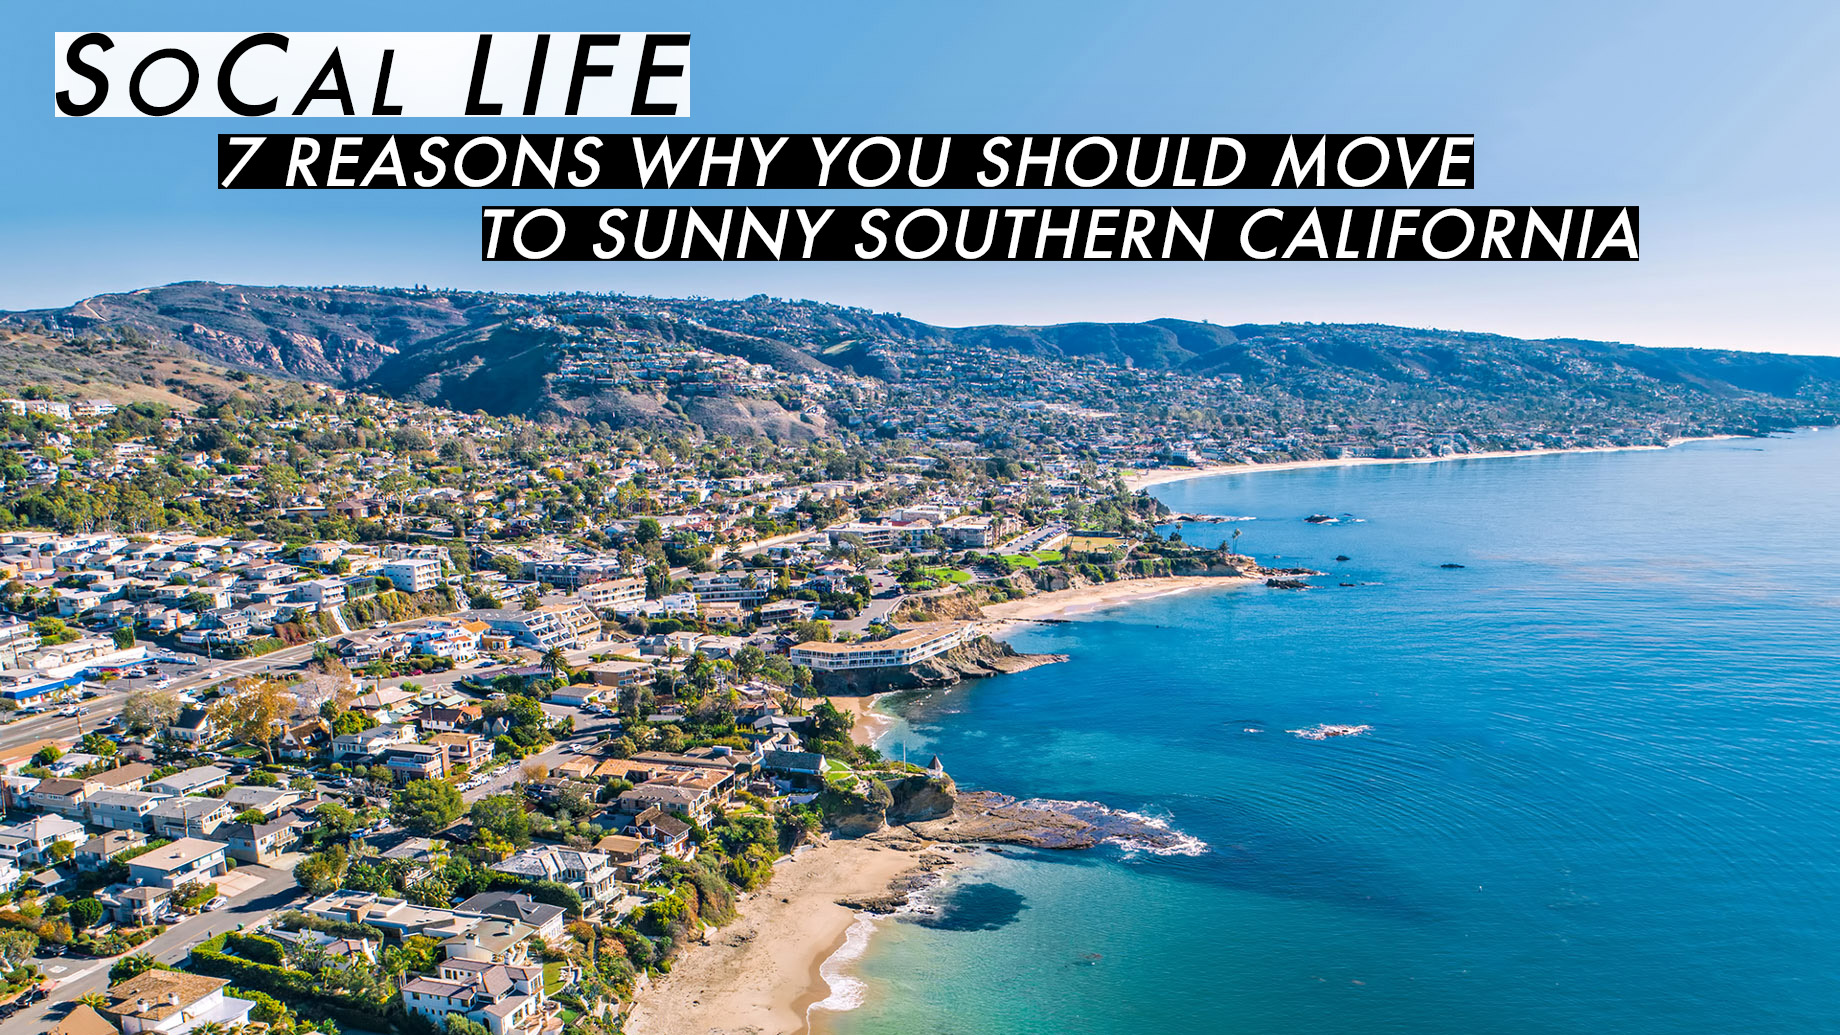 SoCal Life – 7 Reasons Why You Should Move to Sunny Southern California